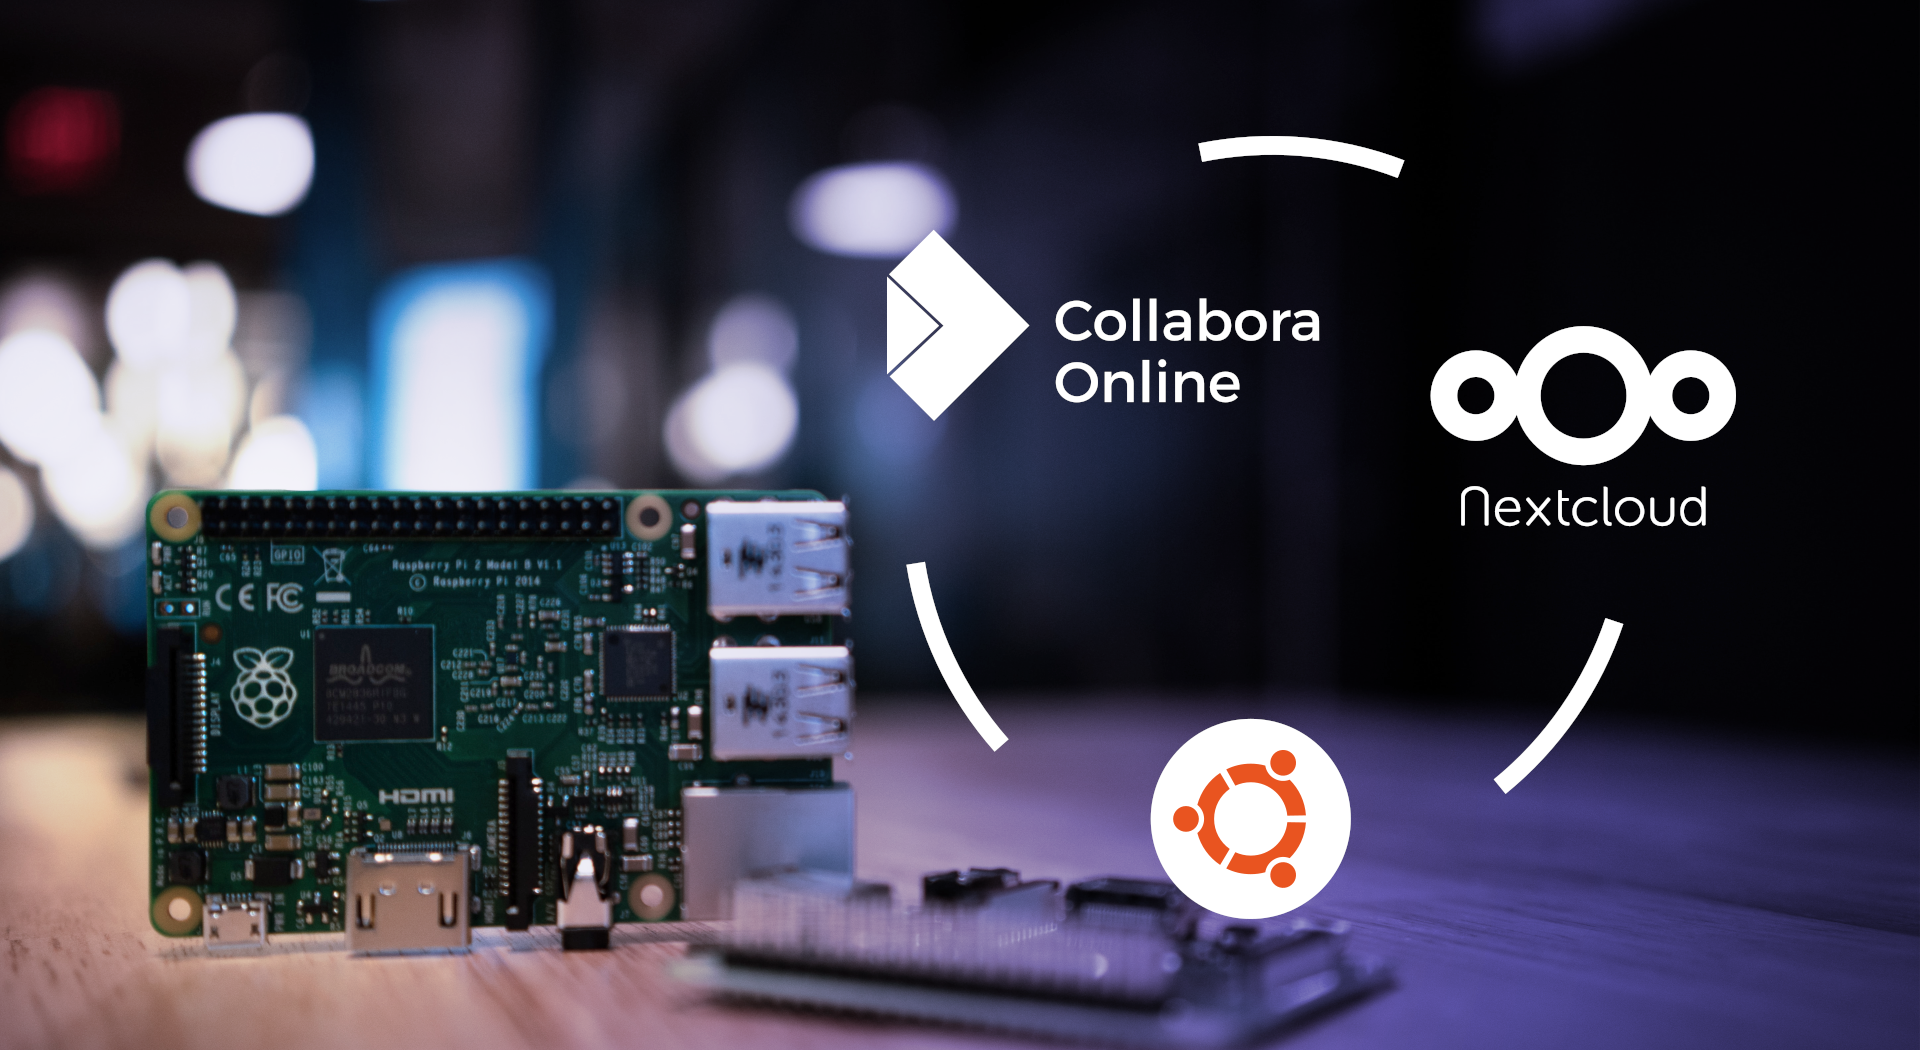 Canonical, Nextcloud Collabora deliver work-from-home solution to Raspberry Pi and enterprise ARM users - Collabora and Collabora Online